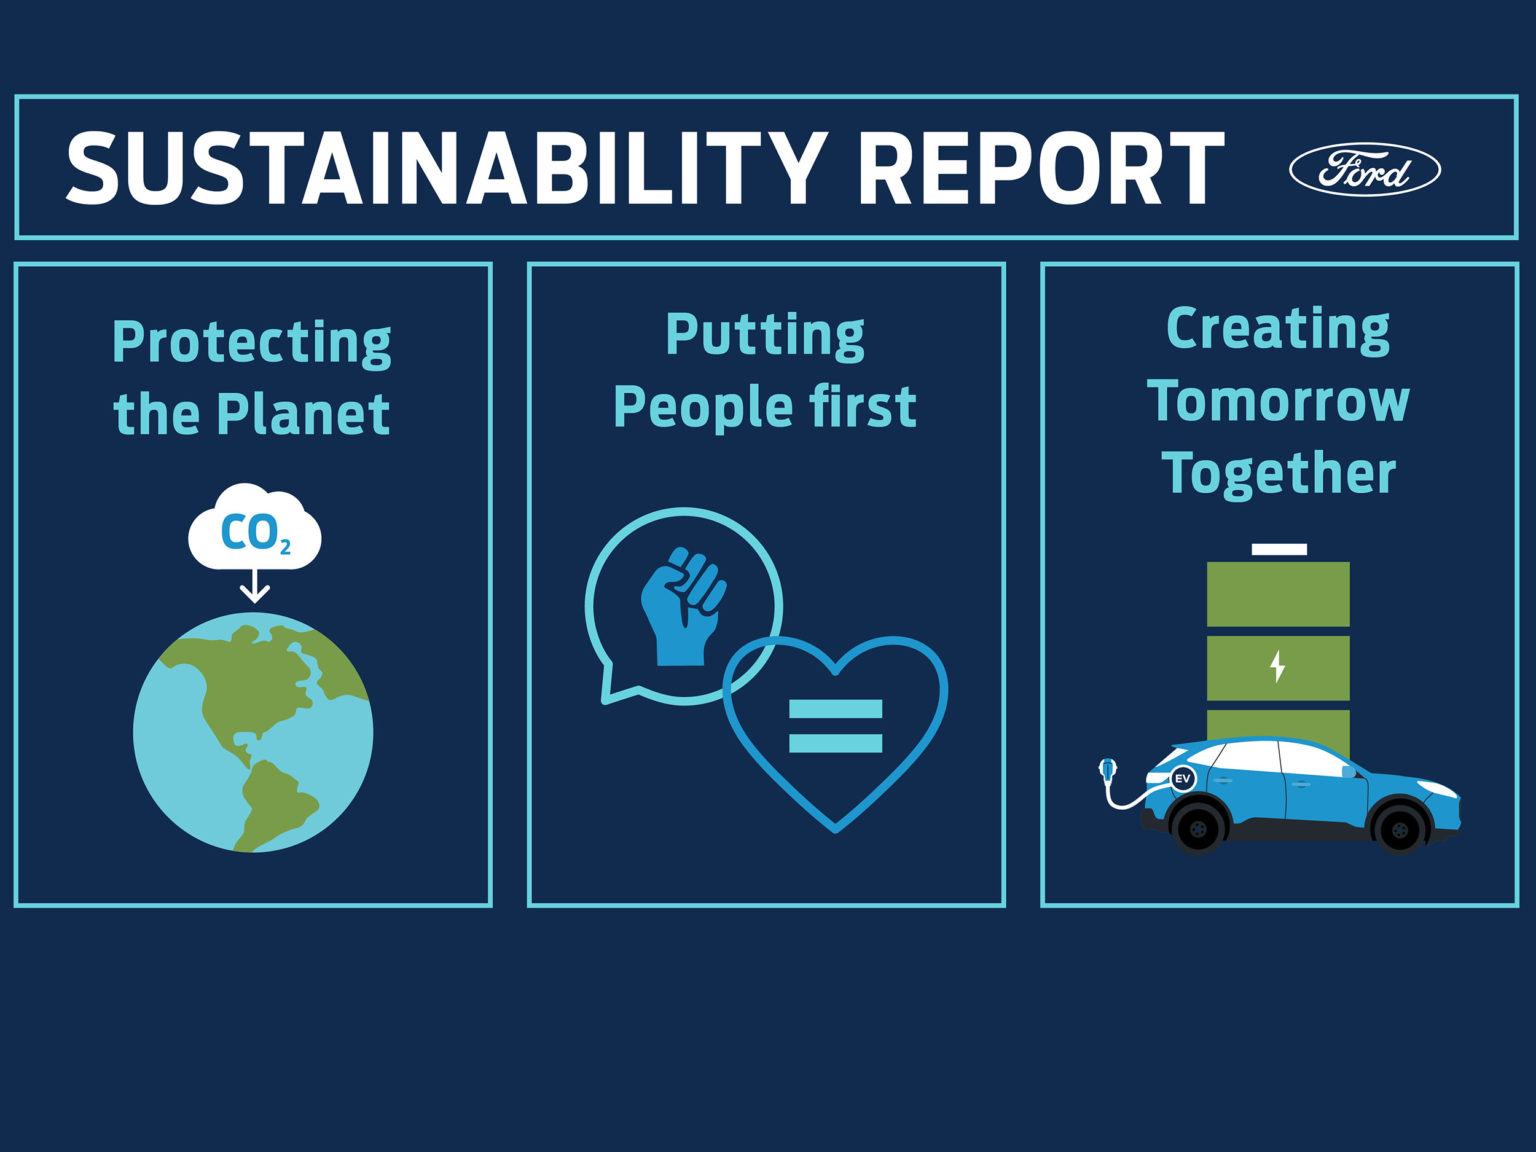 Ford Motor Company has released its 21st sustainability report.